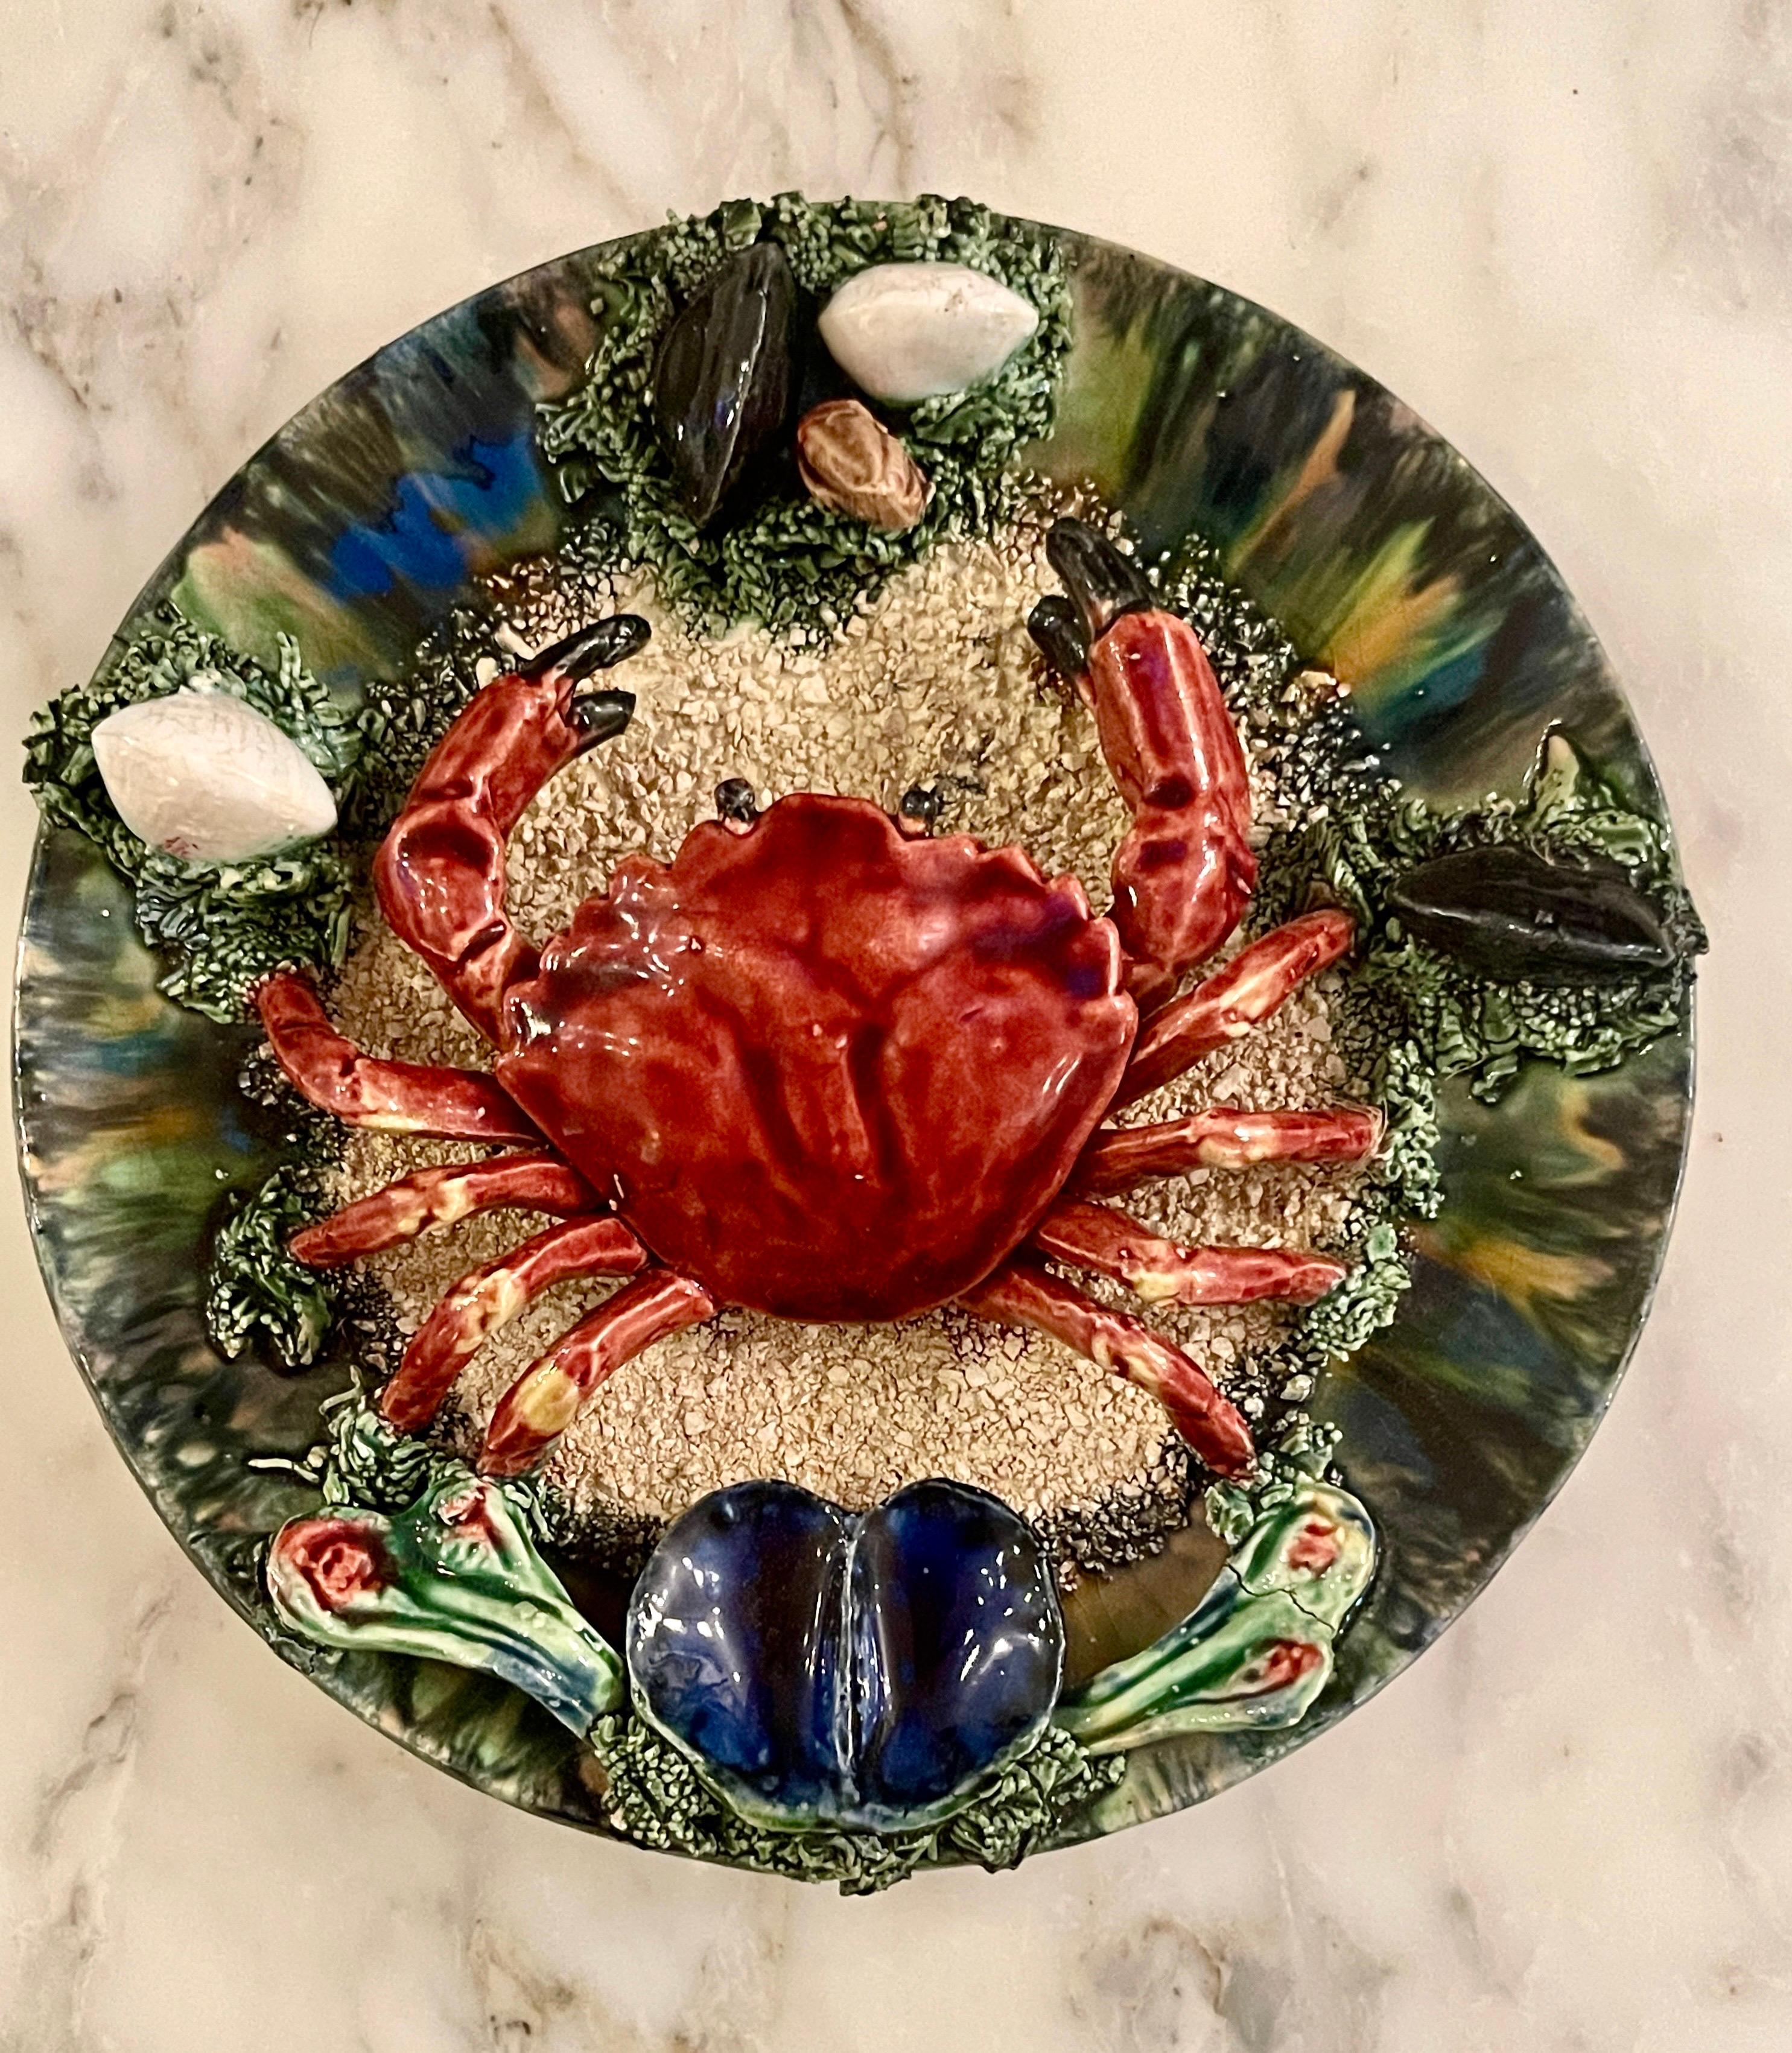 Palissy Style Majolica Crab Motif Plate, Portugal, C. 1940s
Portugal, Circa 1940s

Presenting an exquisite Palissy Style Majolica Crab Motif Plate, from Portugal, Post WWII.  This piece shows the fine artistry of 20th-century Portuguese majolica,